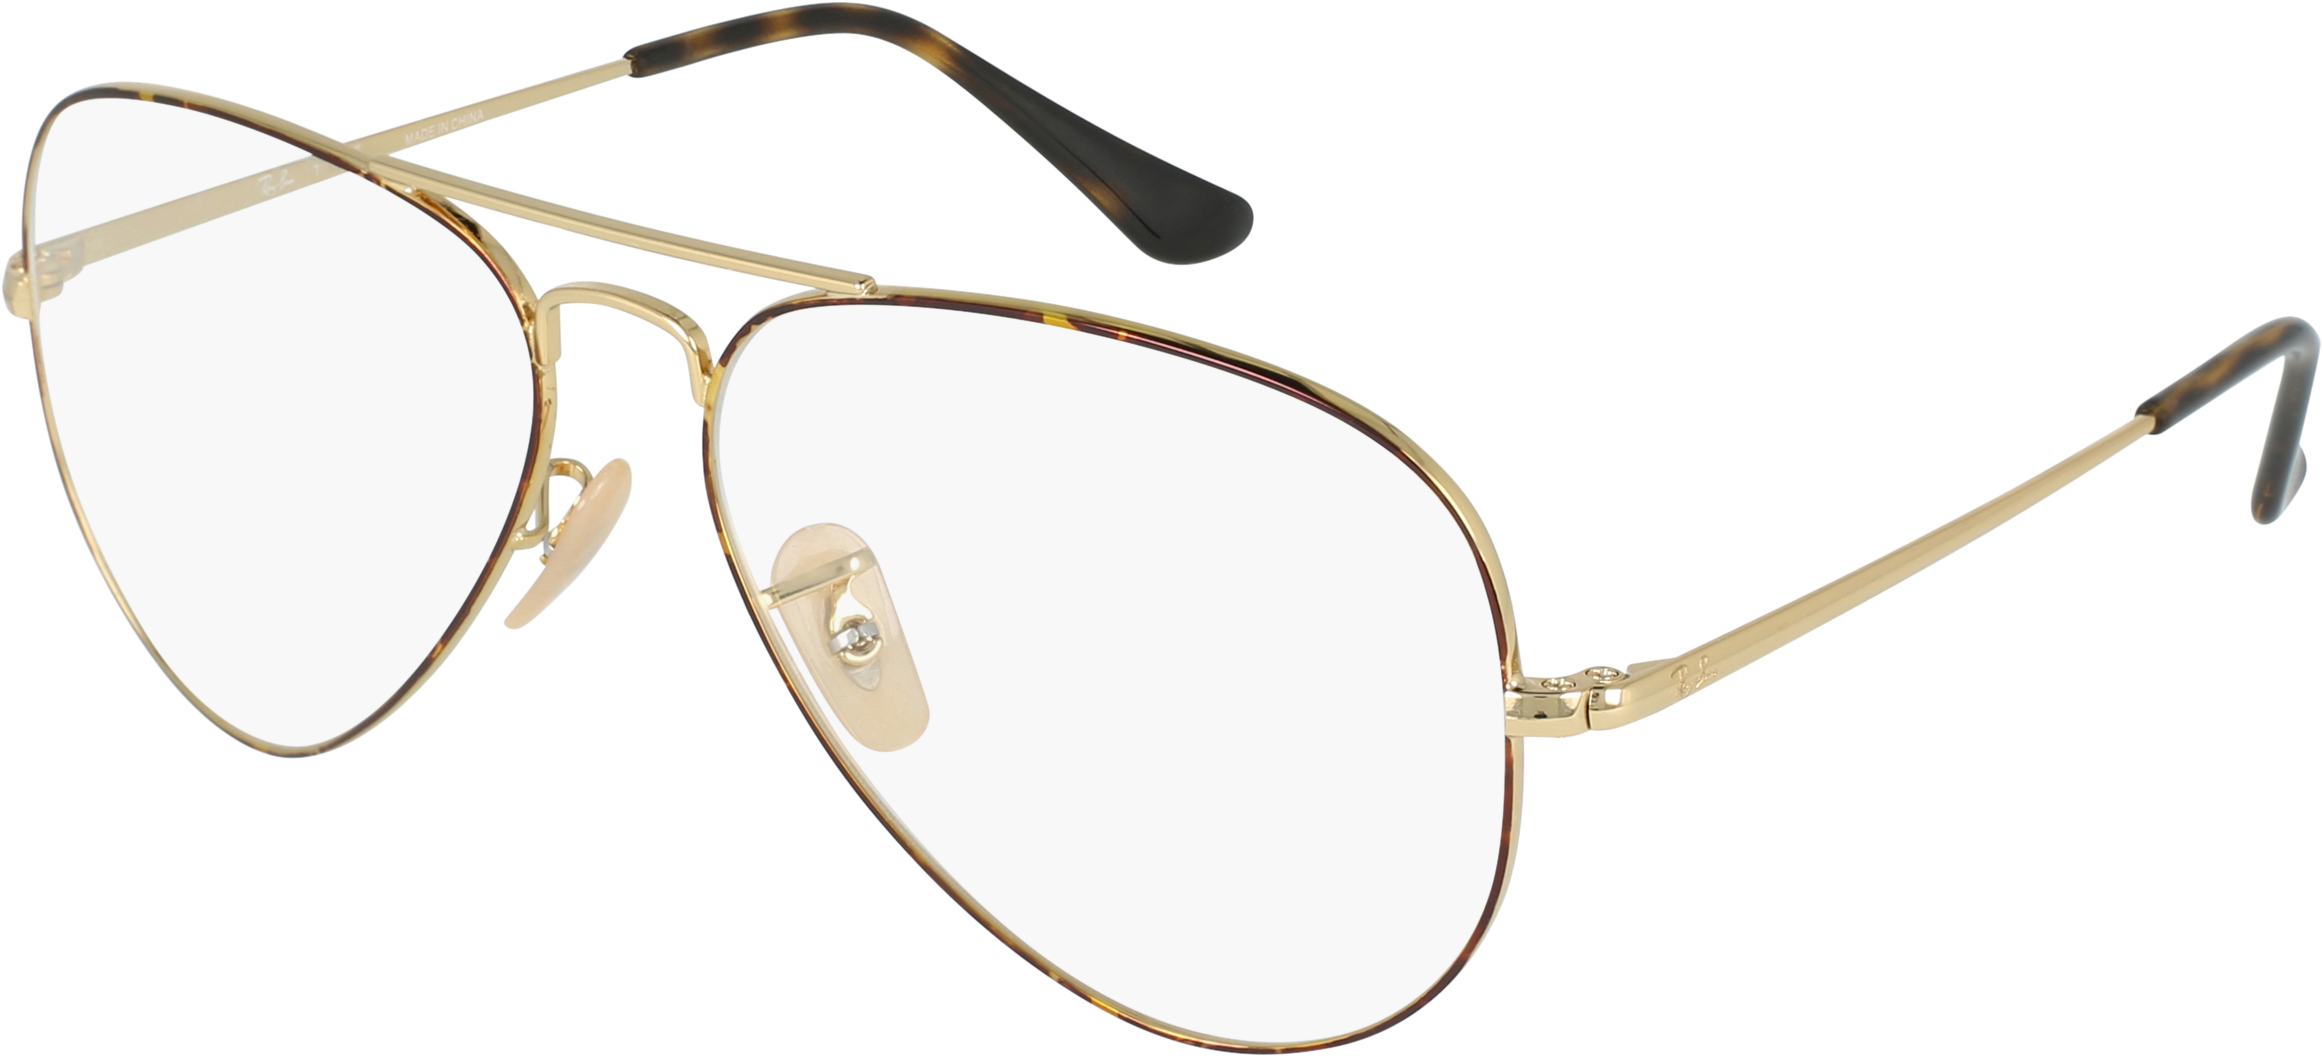 Rayban Rb 6489 Unisex's Eyeglasses - Ray-ban (2500x1400), Png Download